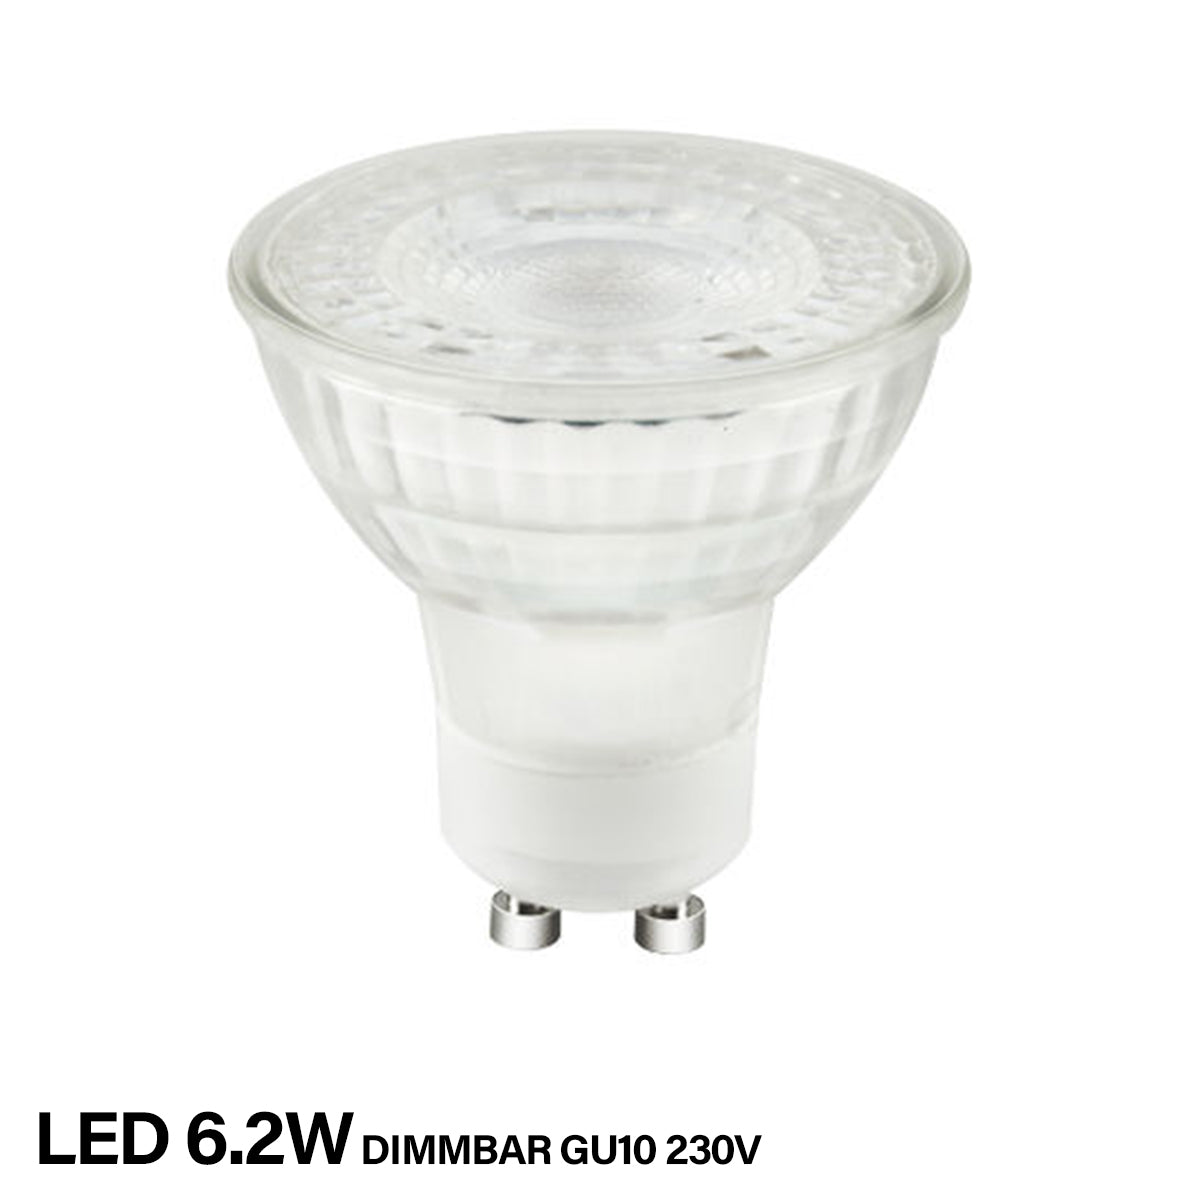 LED surface-mounted spotlight ceiling 230V Round 6.2W GU10 Black novoom Milano light Dimmable light – Surface-mounted